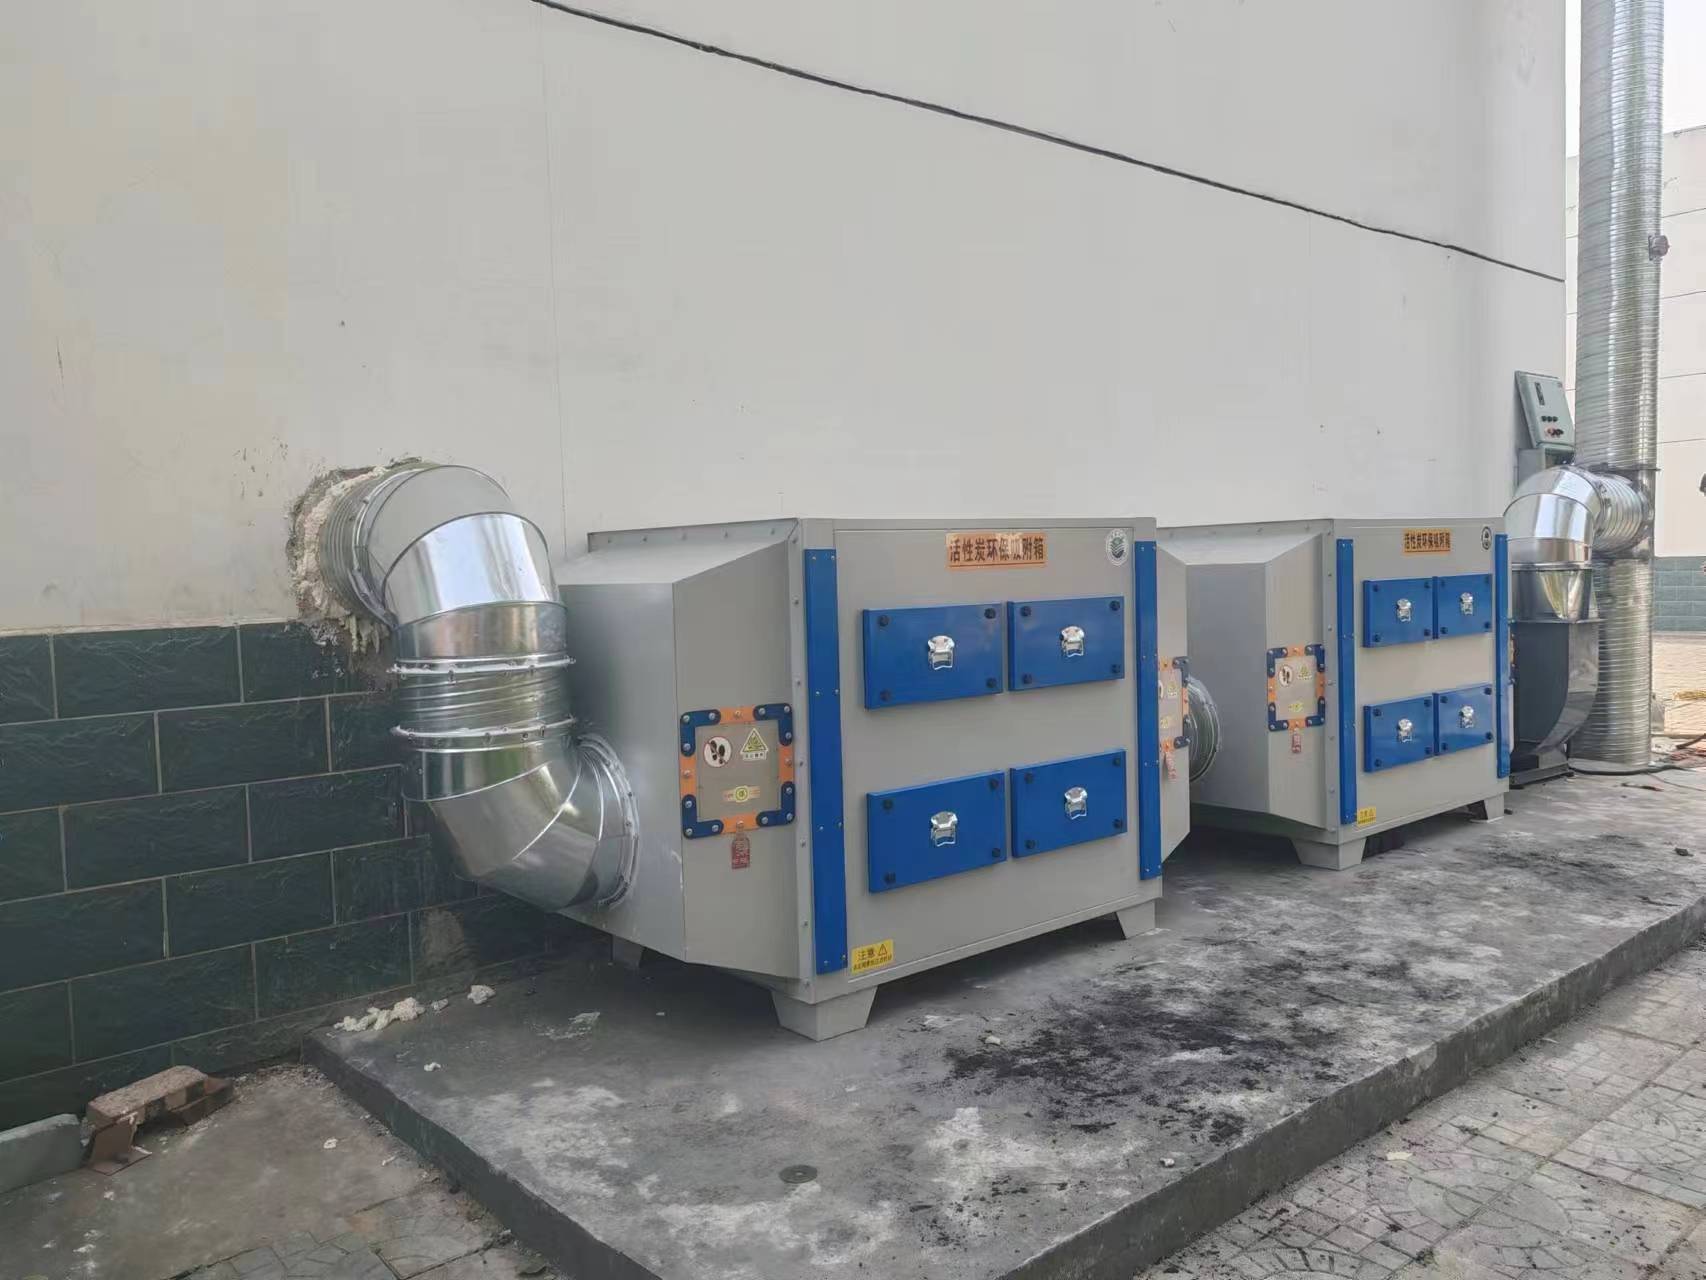  Waste gas treatment equipment of a waste warehouse of China Aviation Oil